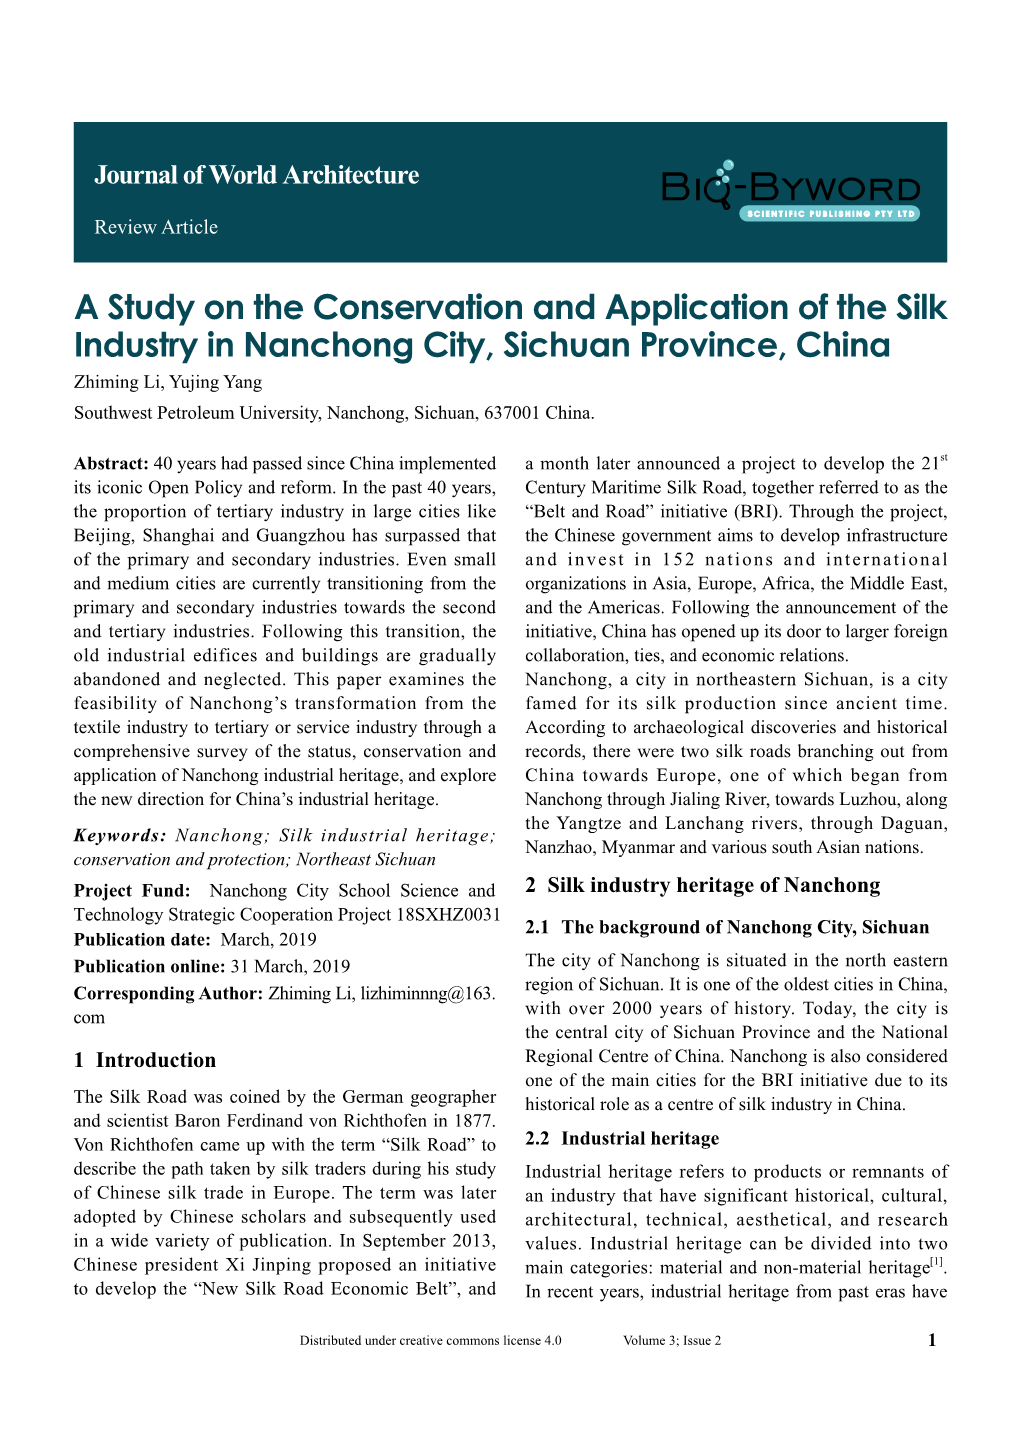 A Study on the Conservation and Application of the Silk Industry in Nanchong City, Sichuan Province, China